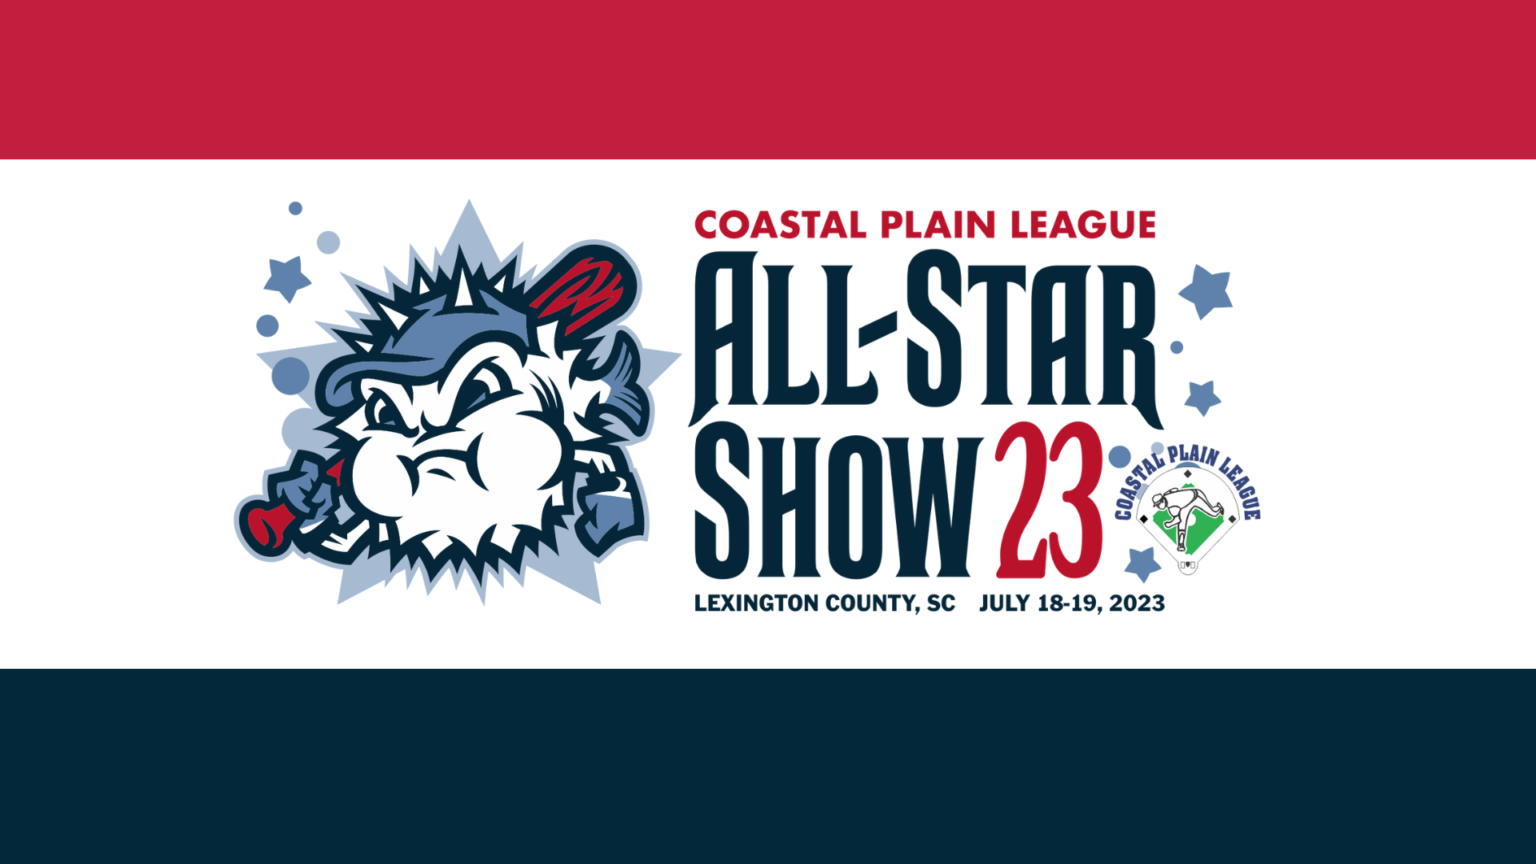 CPL All-Star Show returning to Lexington Columbia coladaily picture pic